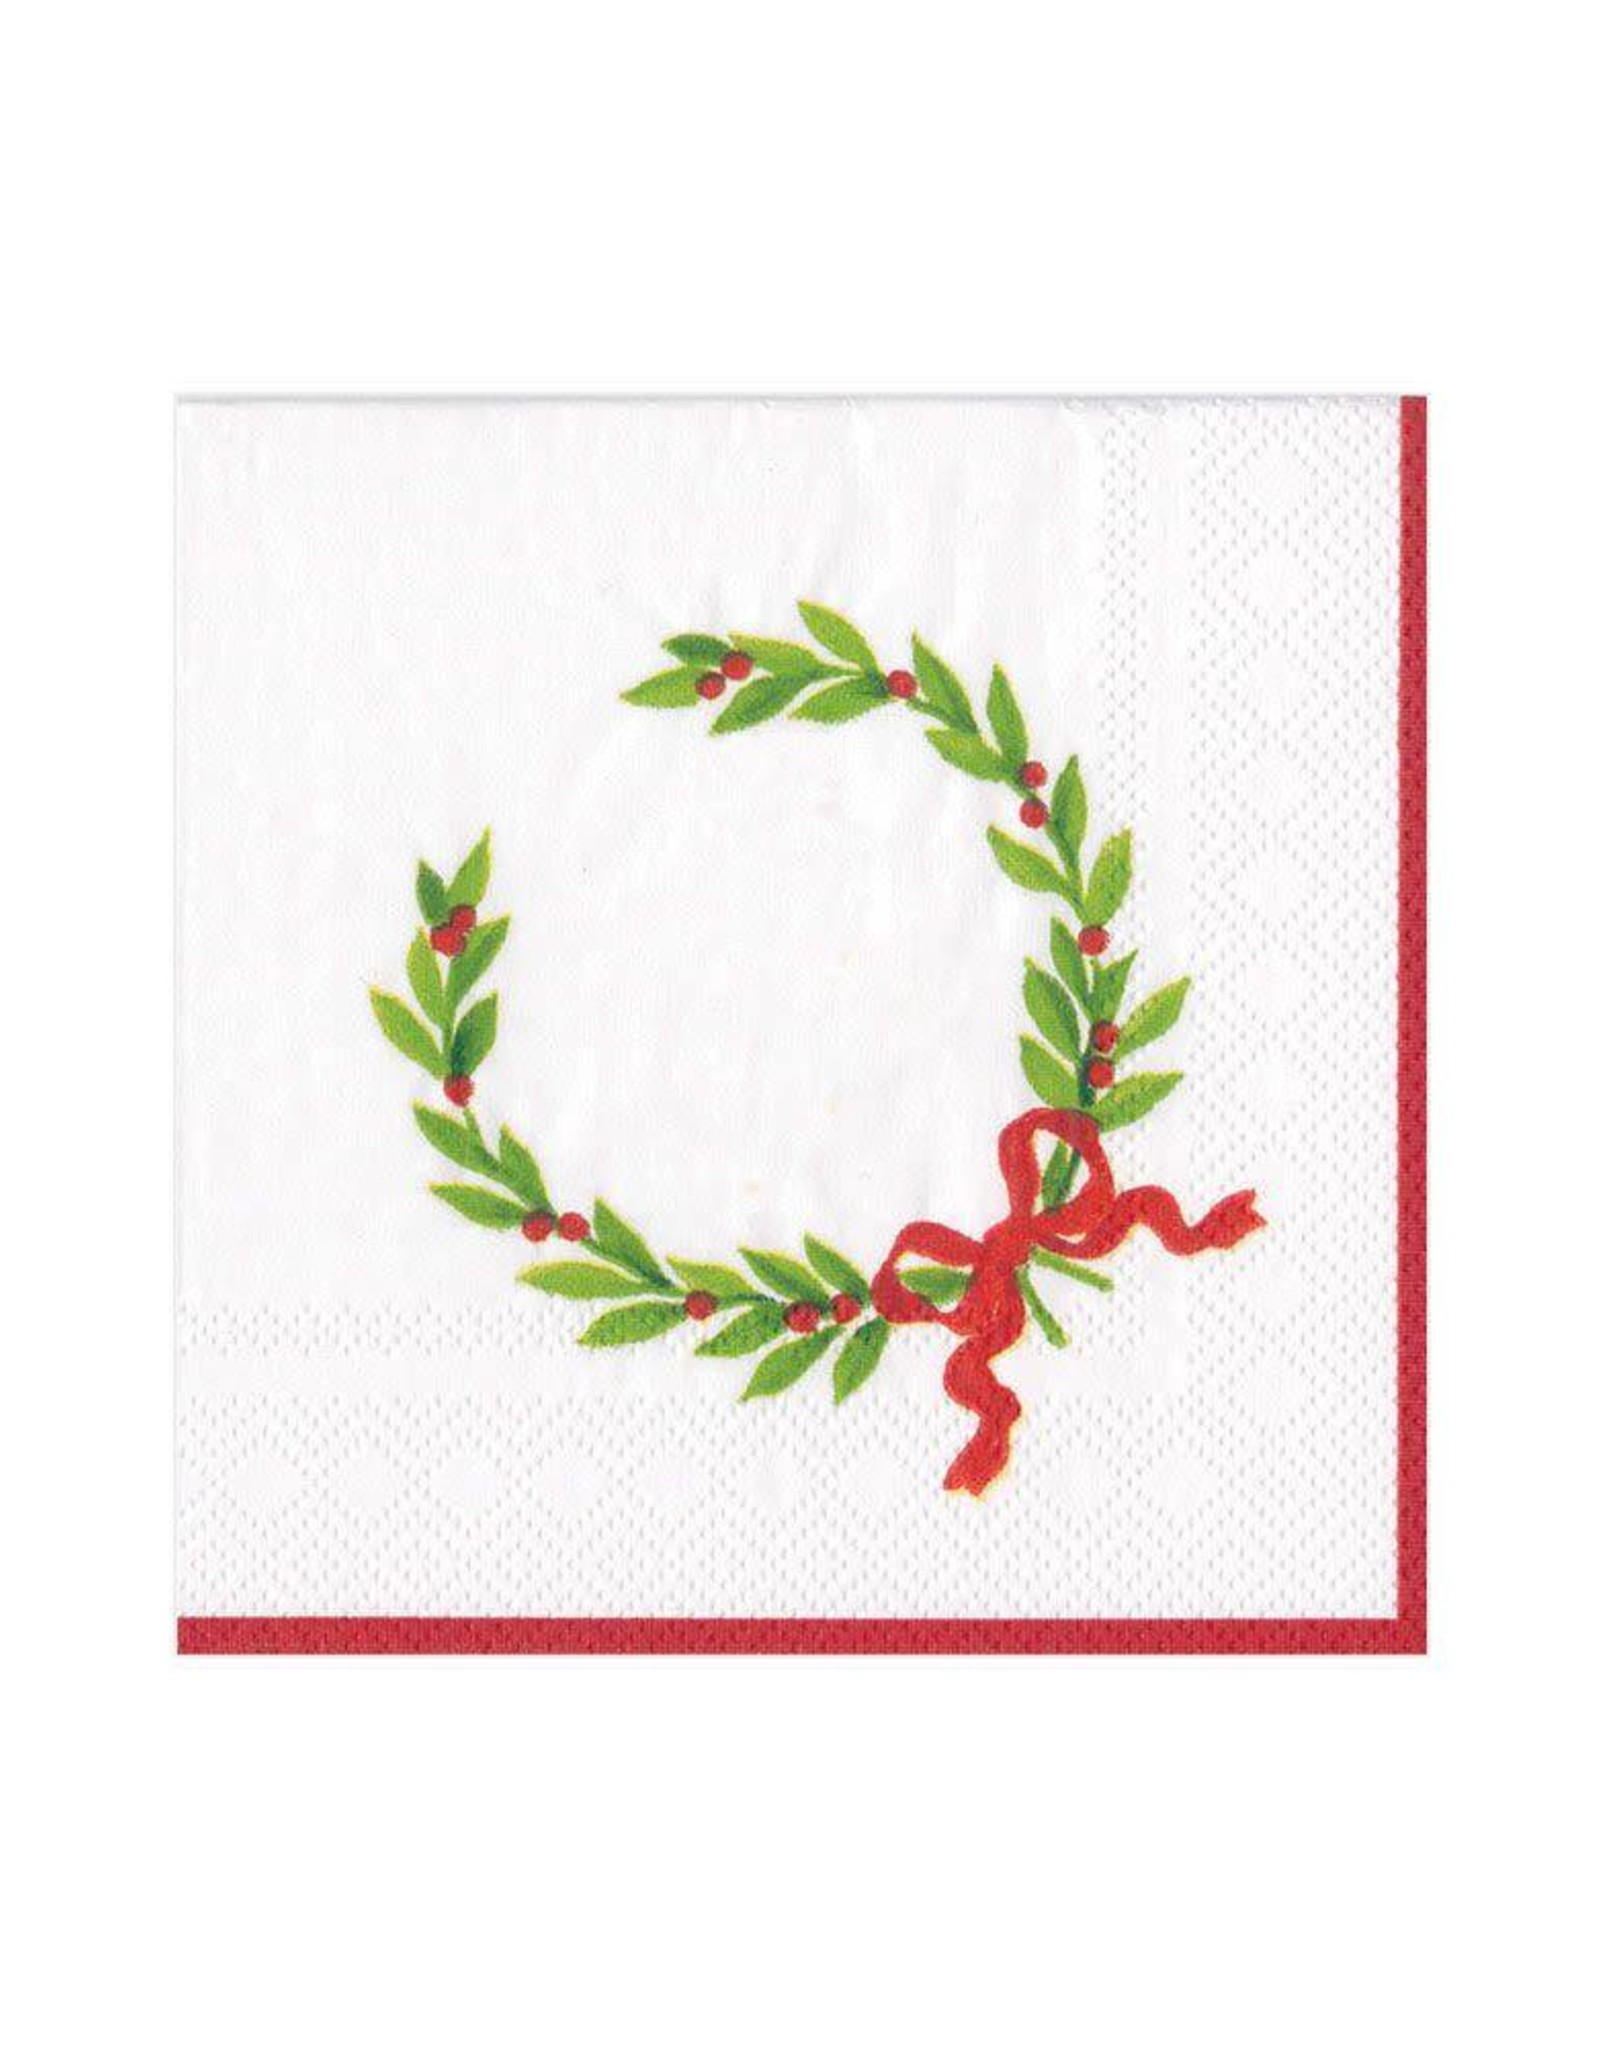 Christmas Laurel Wreath with Initial "R" Beverage Napkin (20ct)